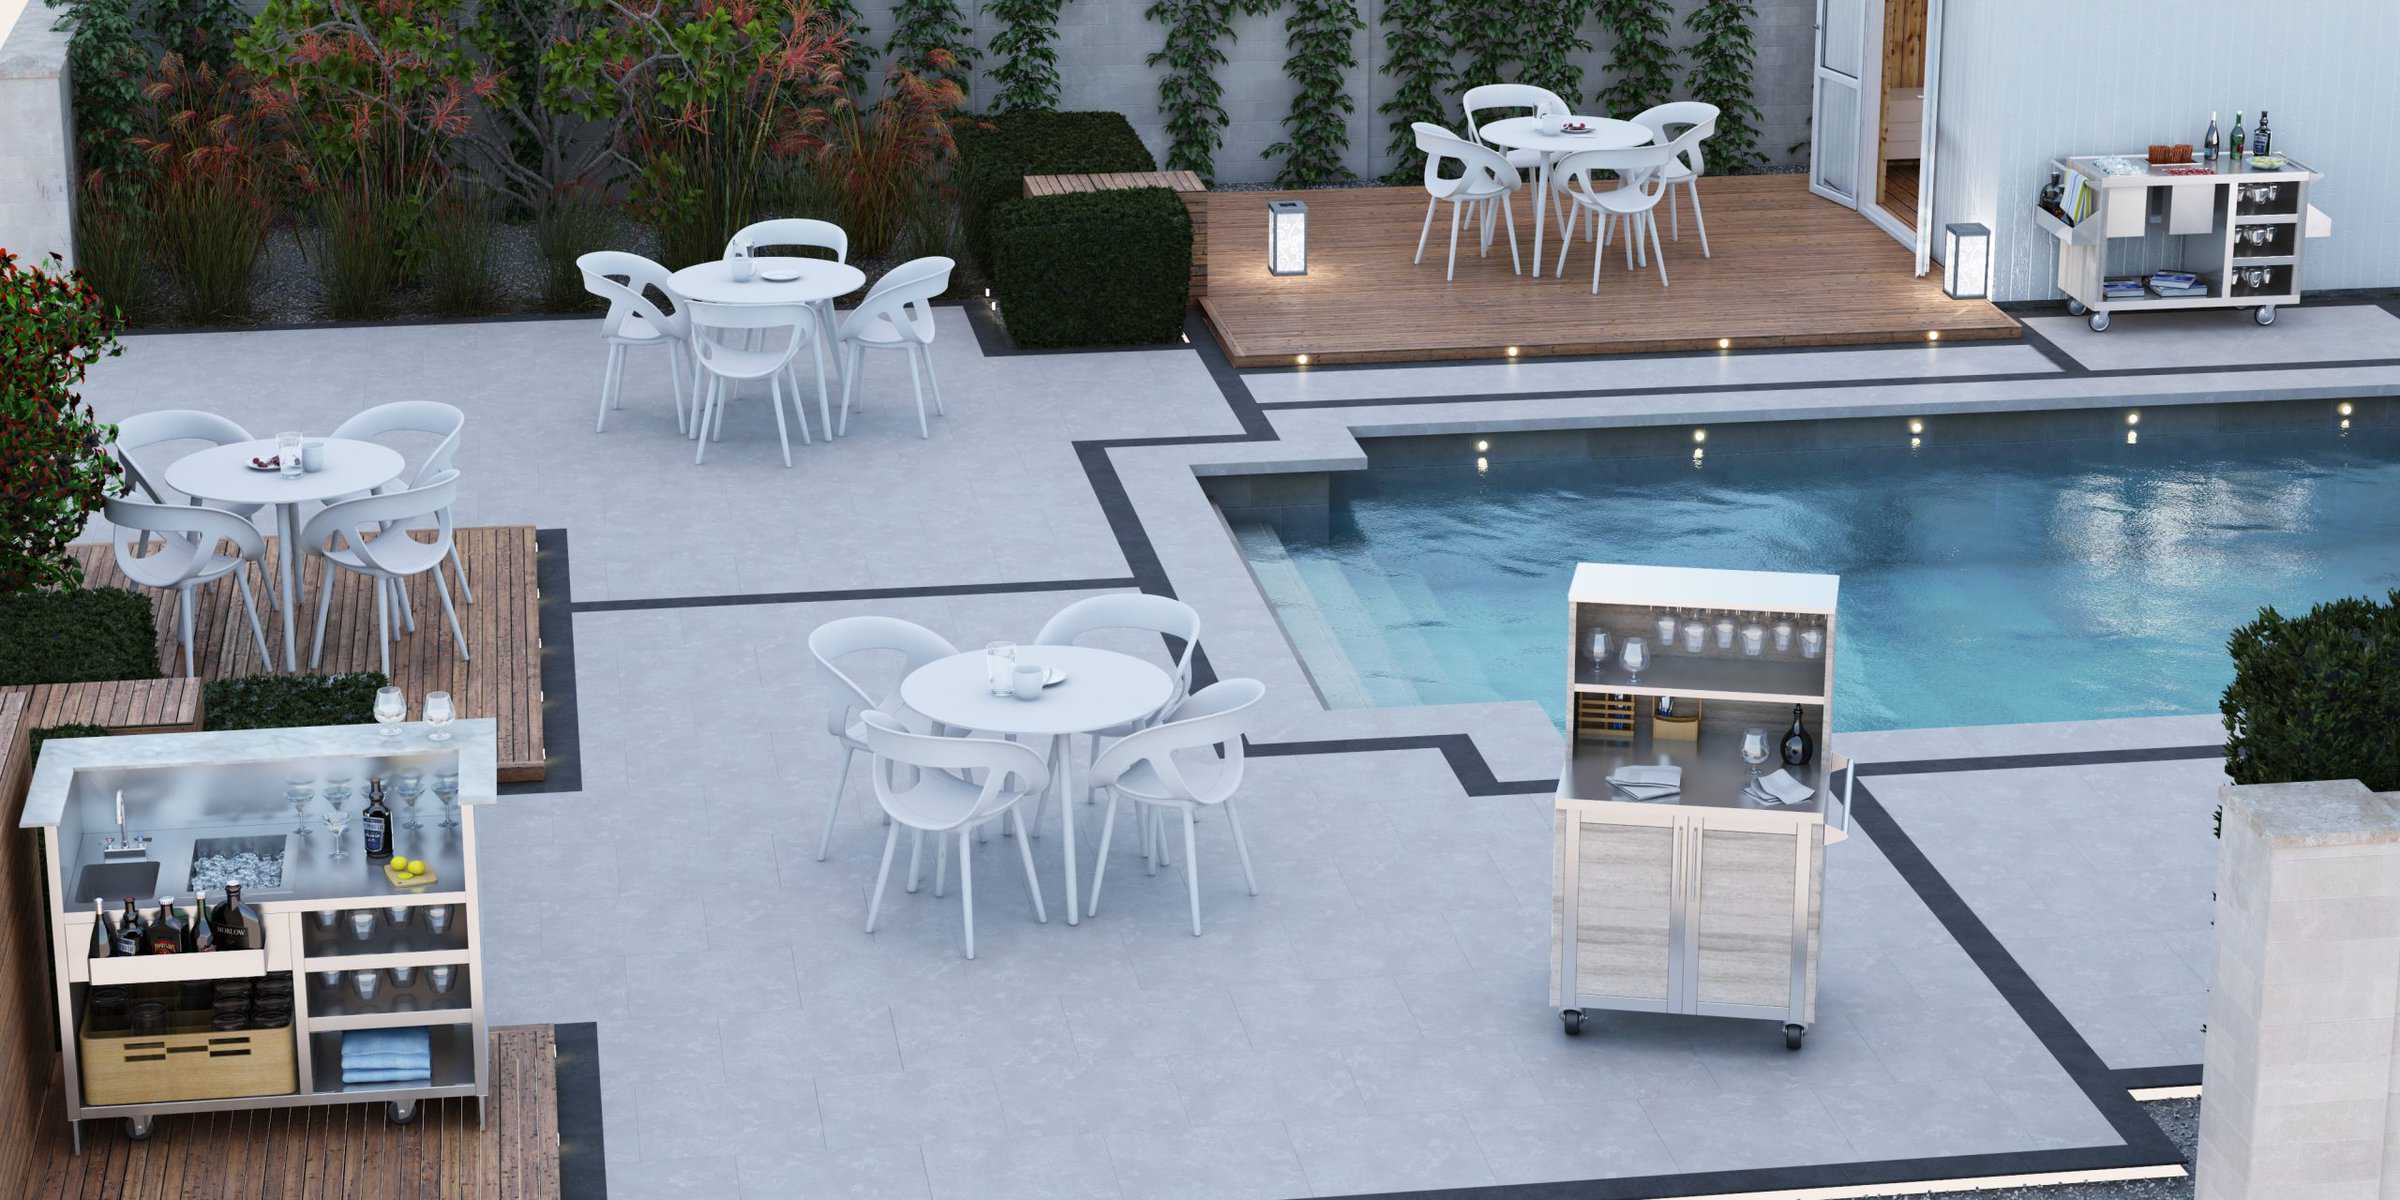 5 Ways to Maximize Your Patio Investment